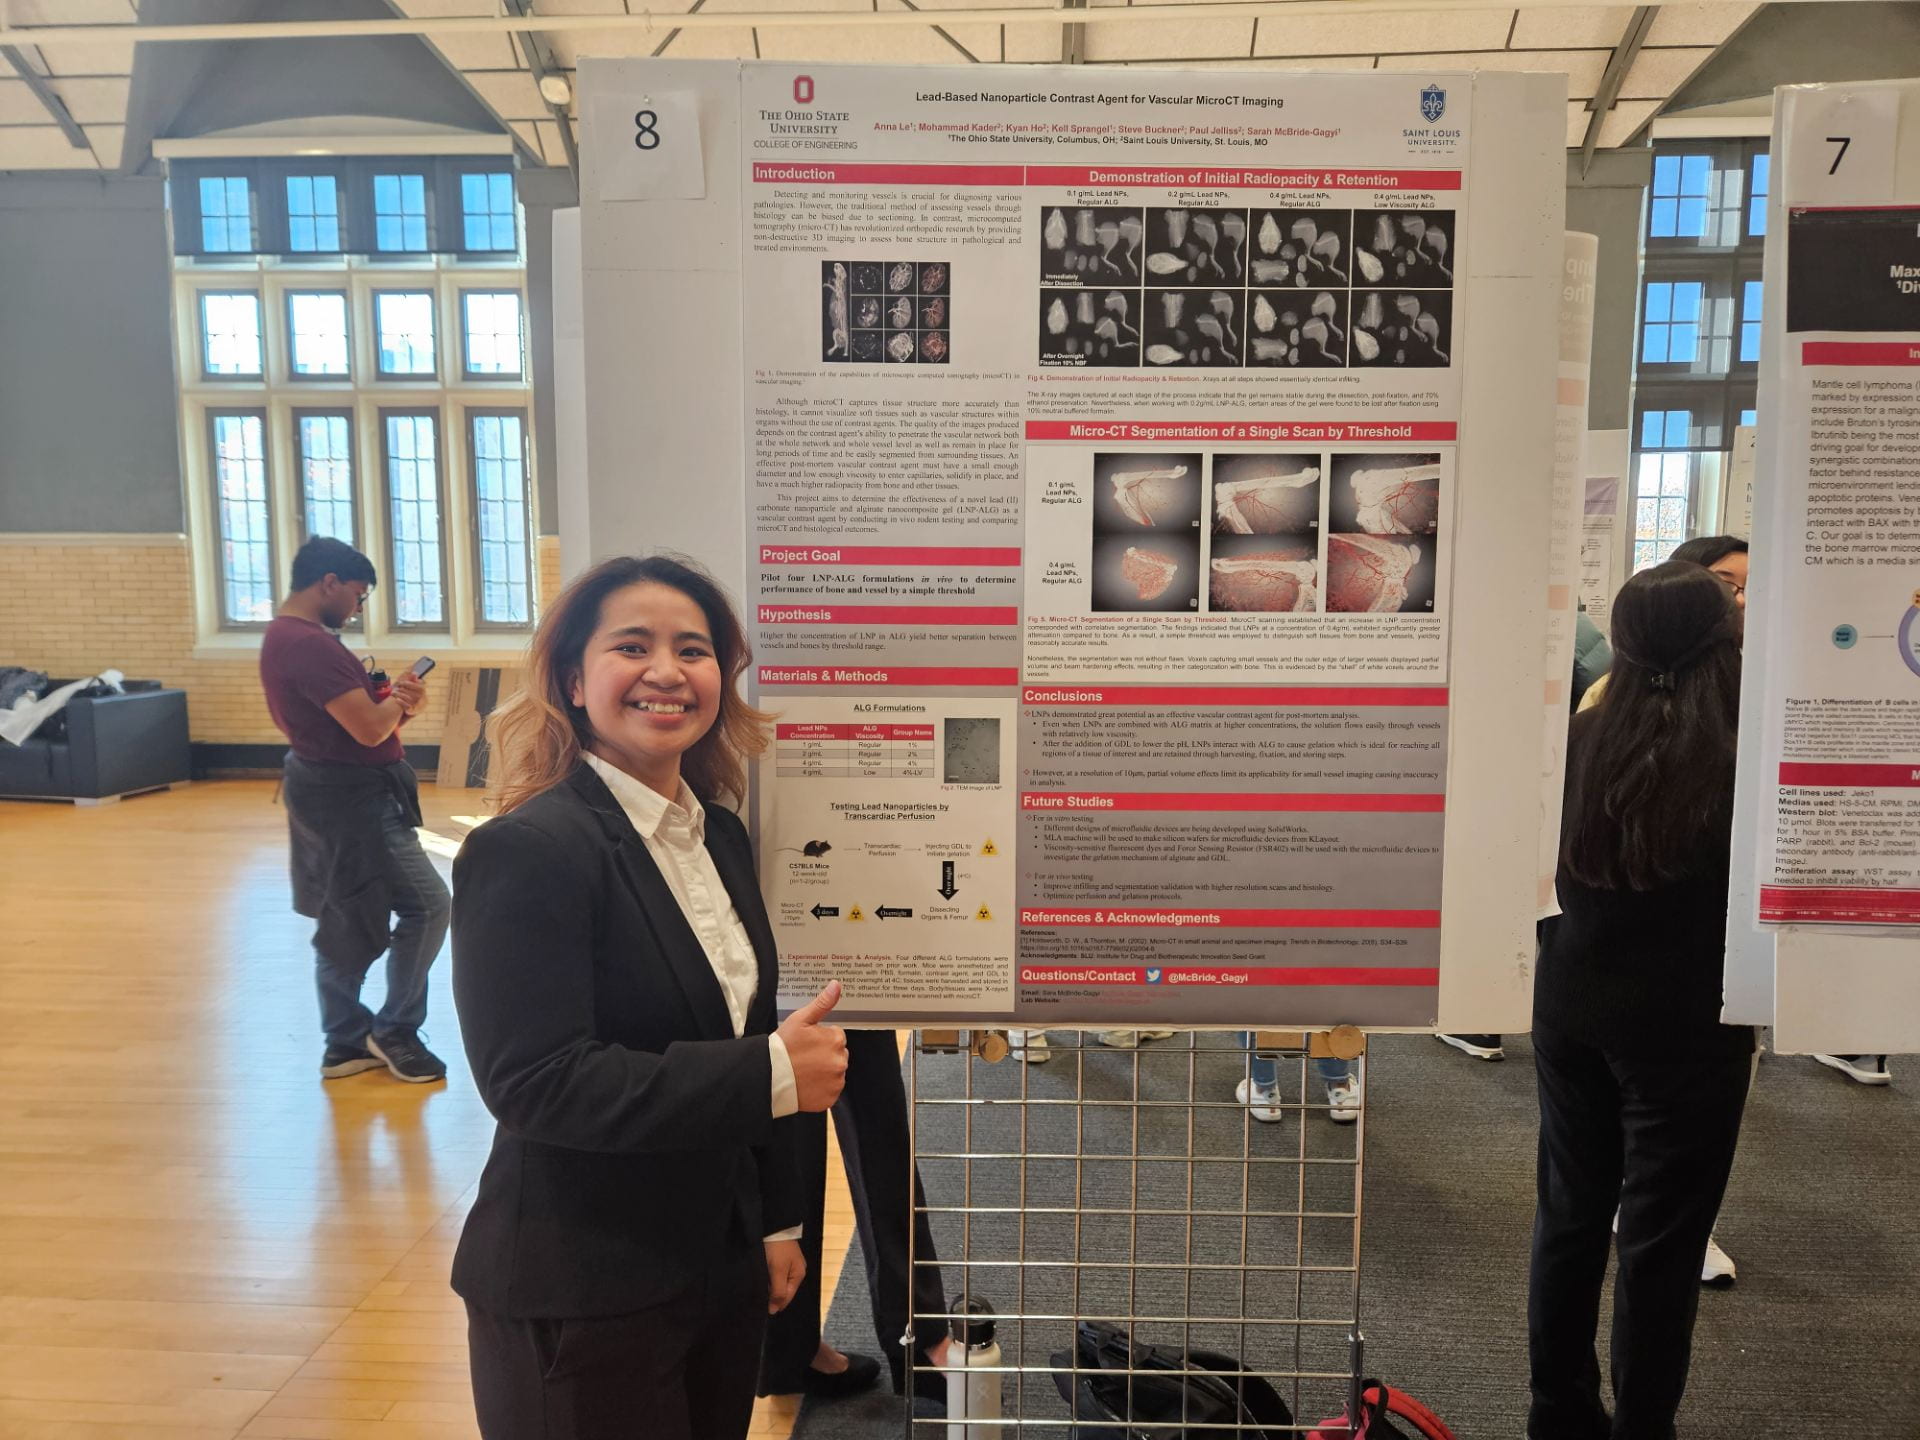 Anna Le with her poster on Lead-based Nanoparticle Contrast Agent for Vascular MicroCT Imaging 